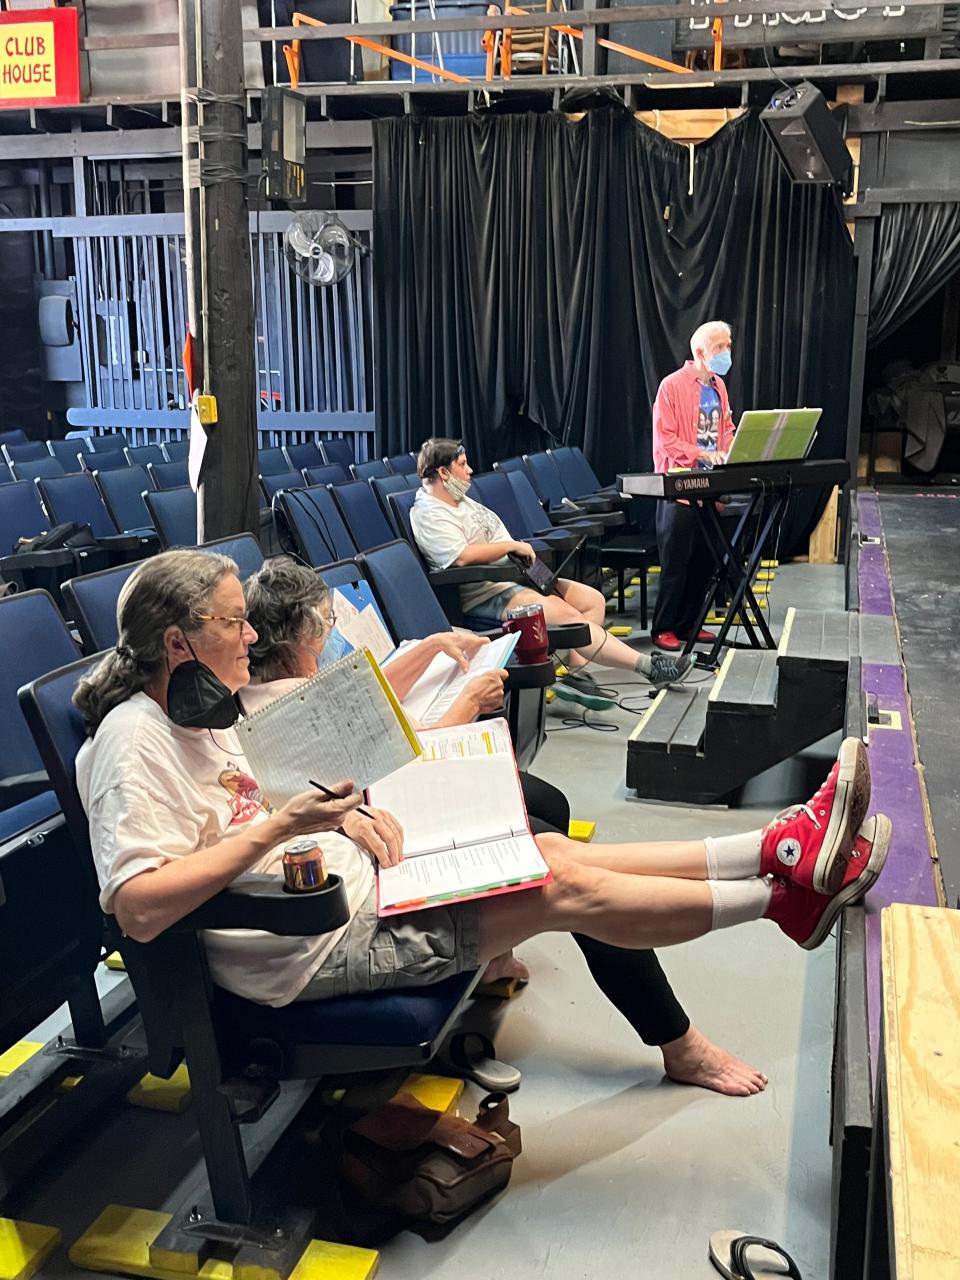 Donna Nudd, left, and Terry Galloway at rehearsals with Mickee Faust Club members for "The Cursed House of Ravensmadd," a skewed interpretation of the Jane Eyre story.